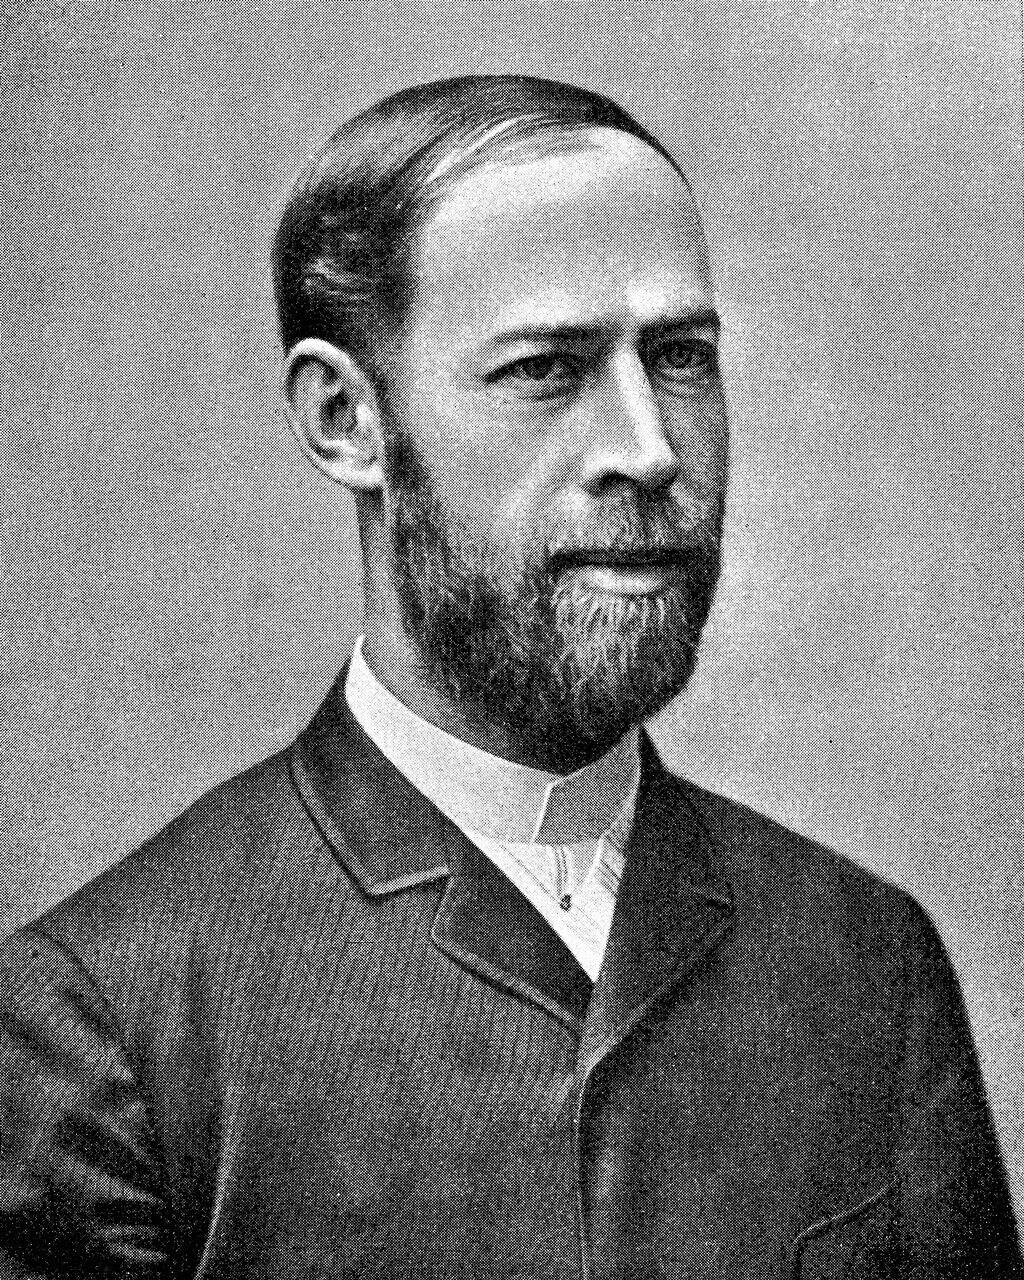 New 8x10 Photo: Heinrich Hertz, German Physicist and Electromagnetism Pioneer